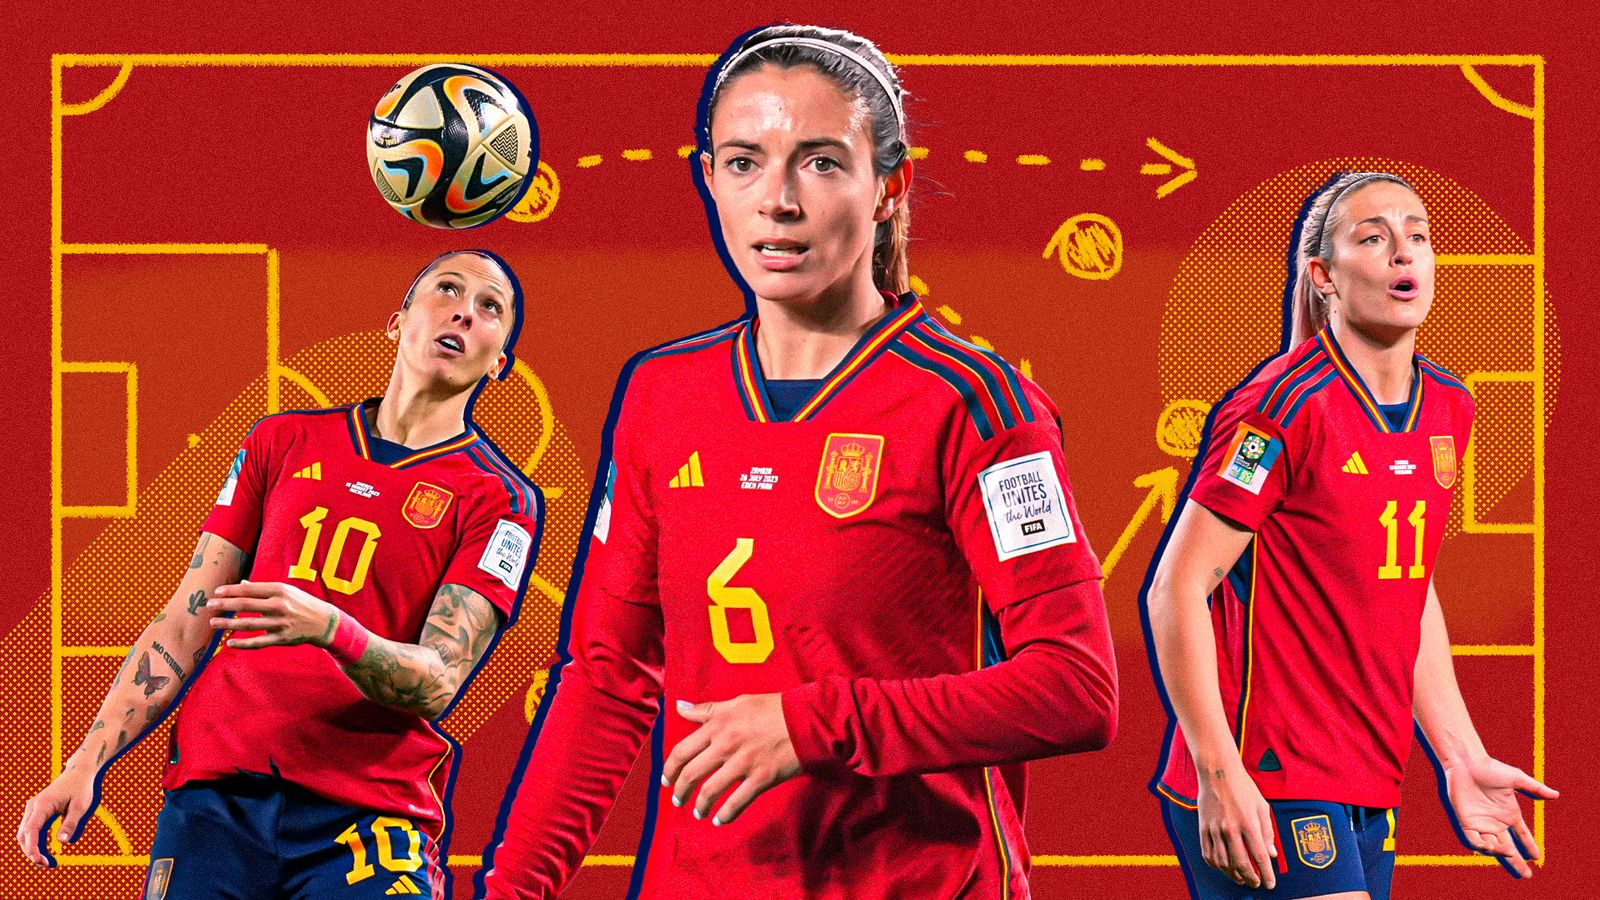 Spain in the Women's football World Cup